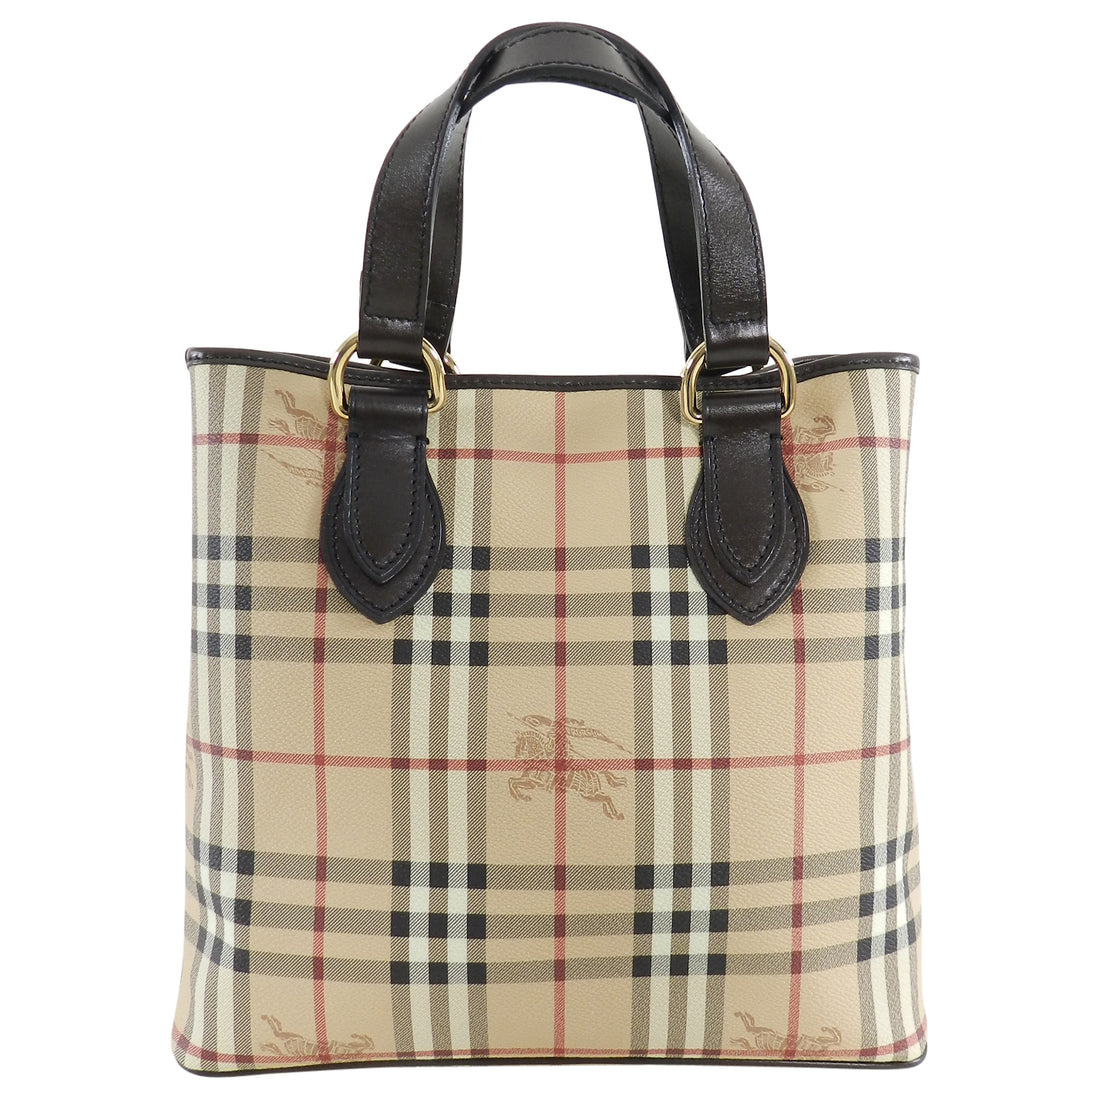 Burberry Haymarket Small Tote Bag – I MISS YOU VINTAGE